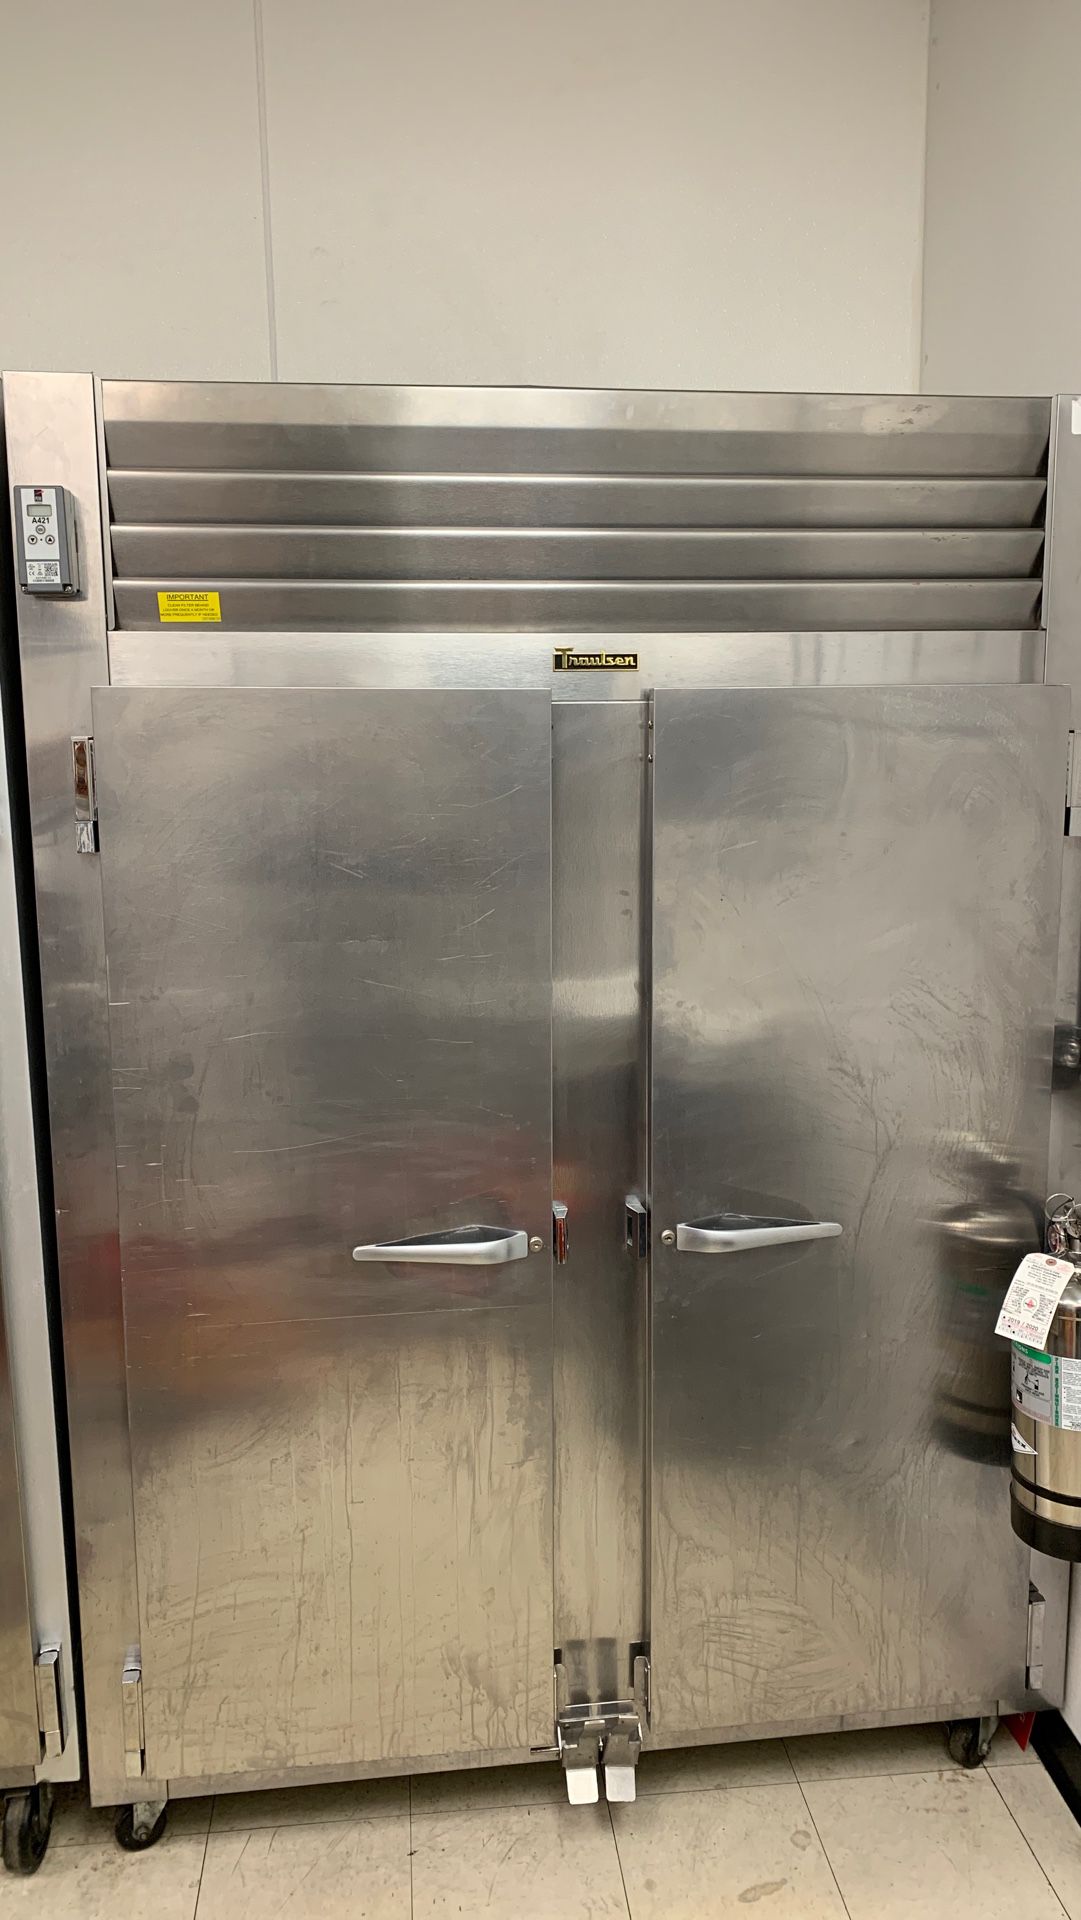 Commercial Traulsen Freezer - not cooling